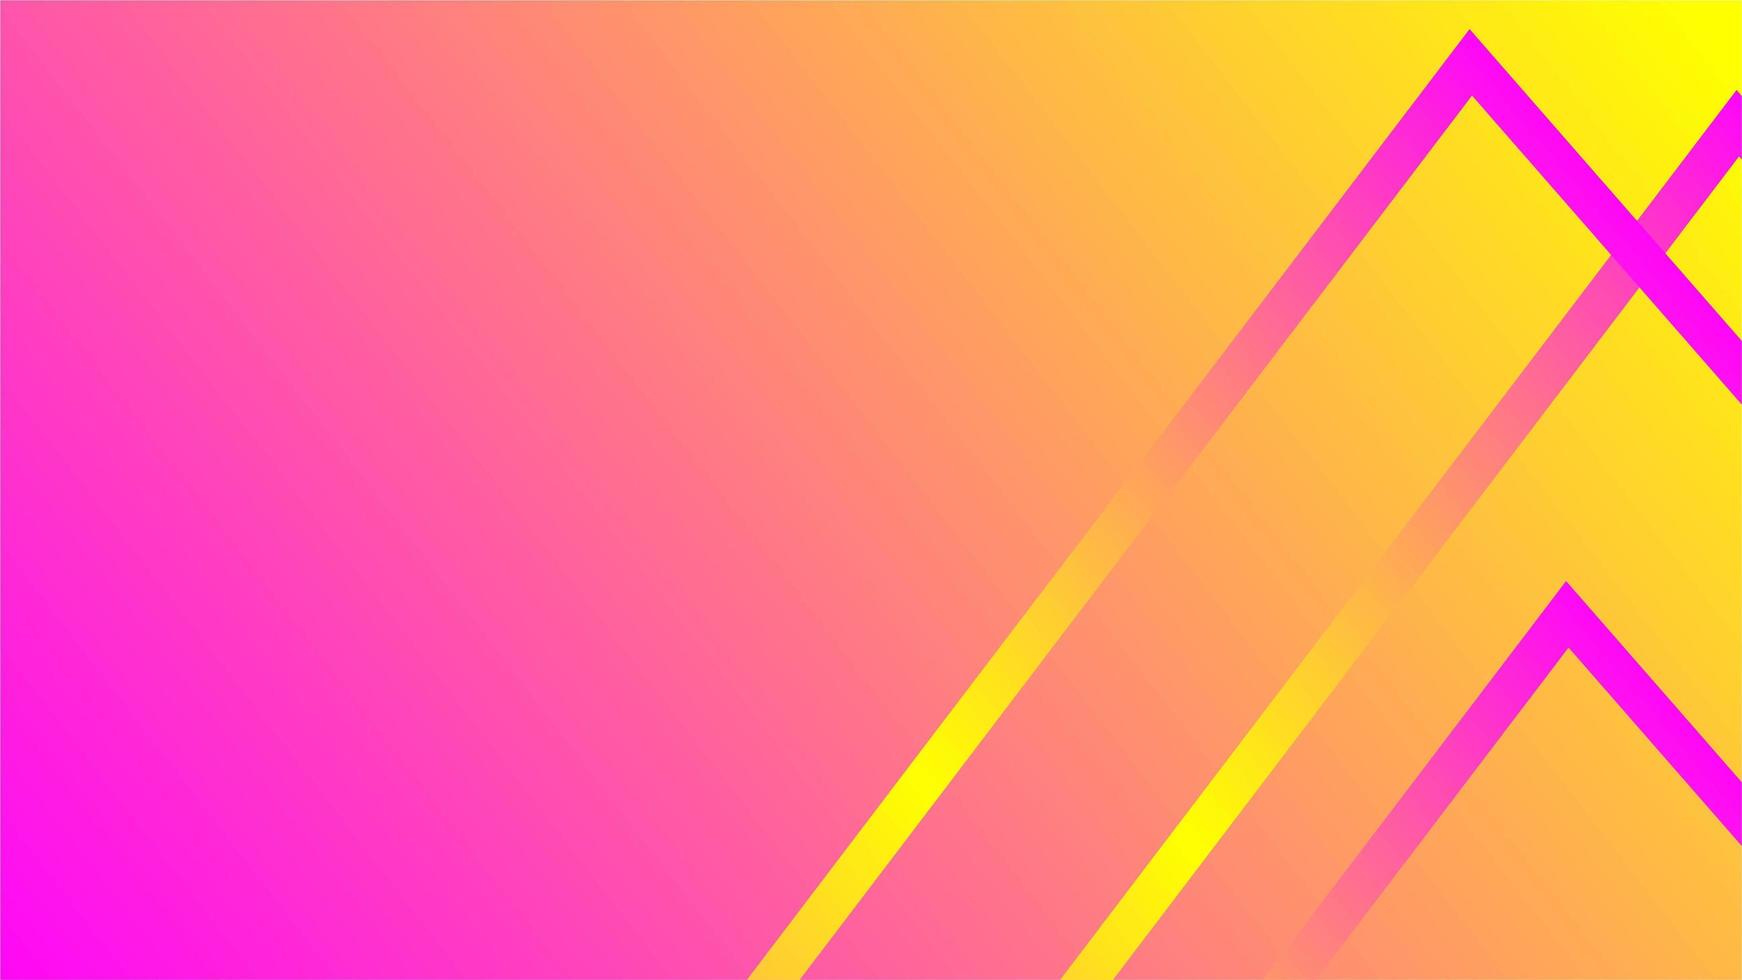 Abstract pink yellow gradient background vector